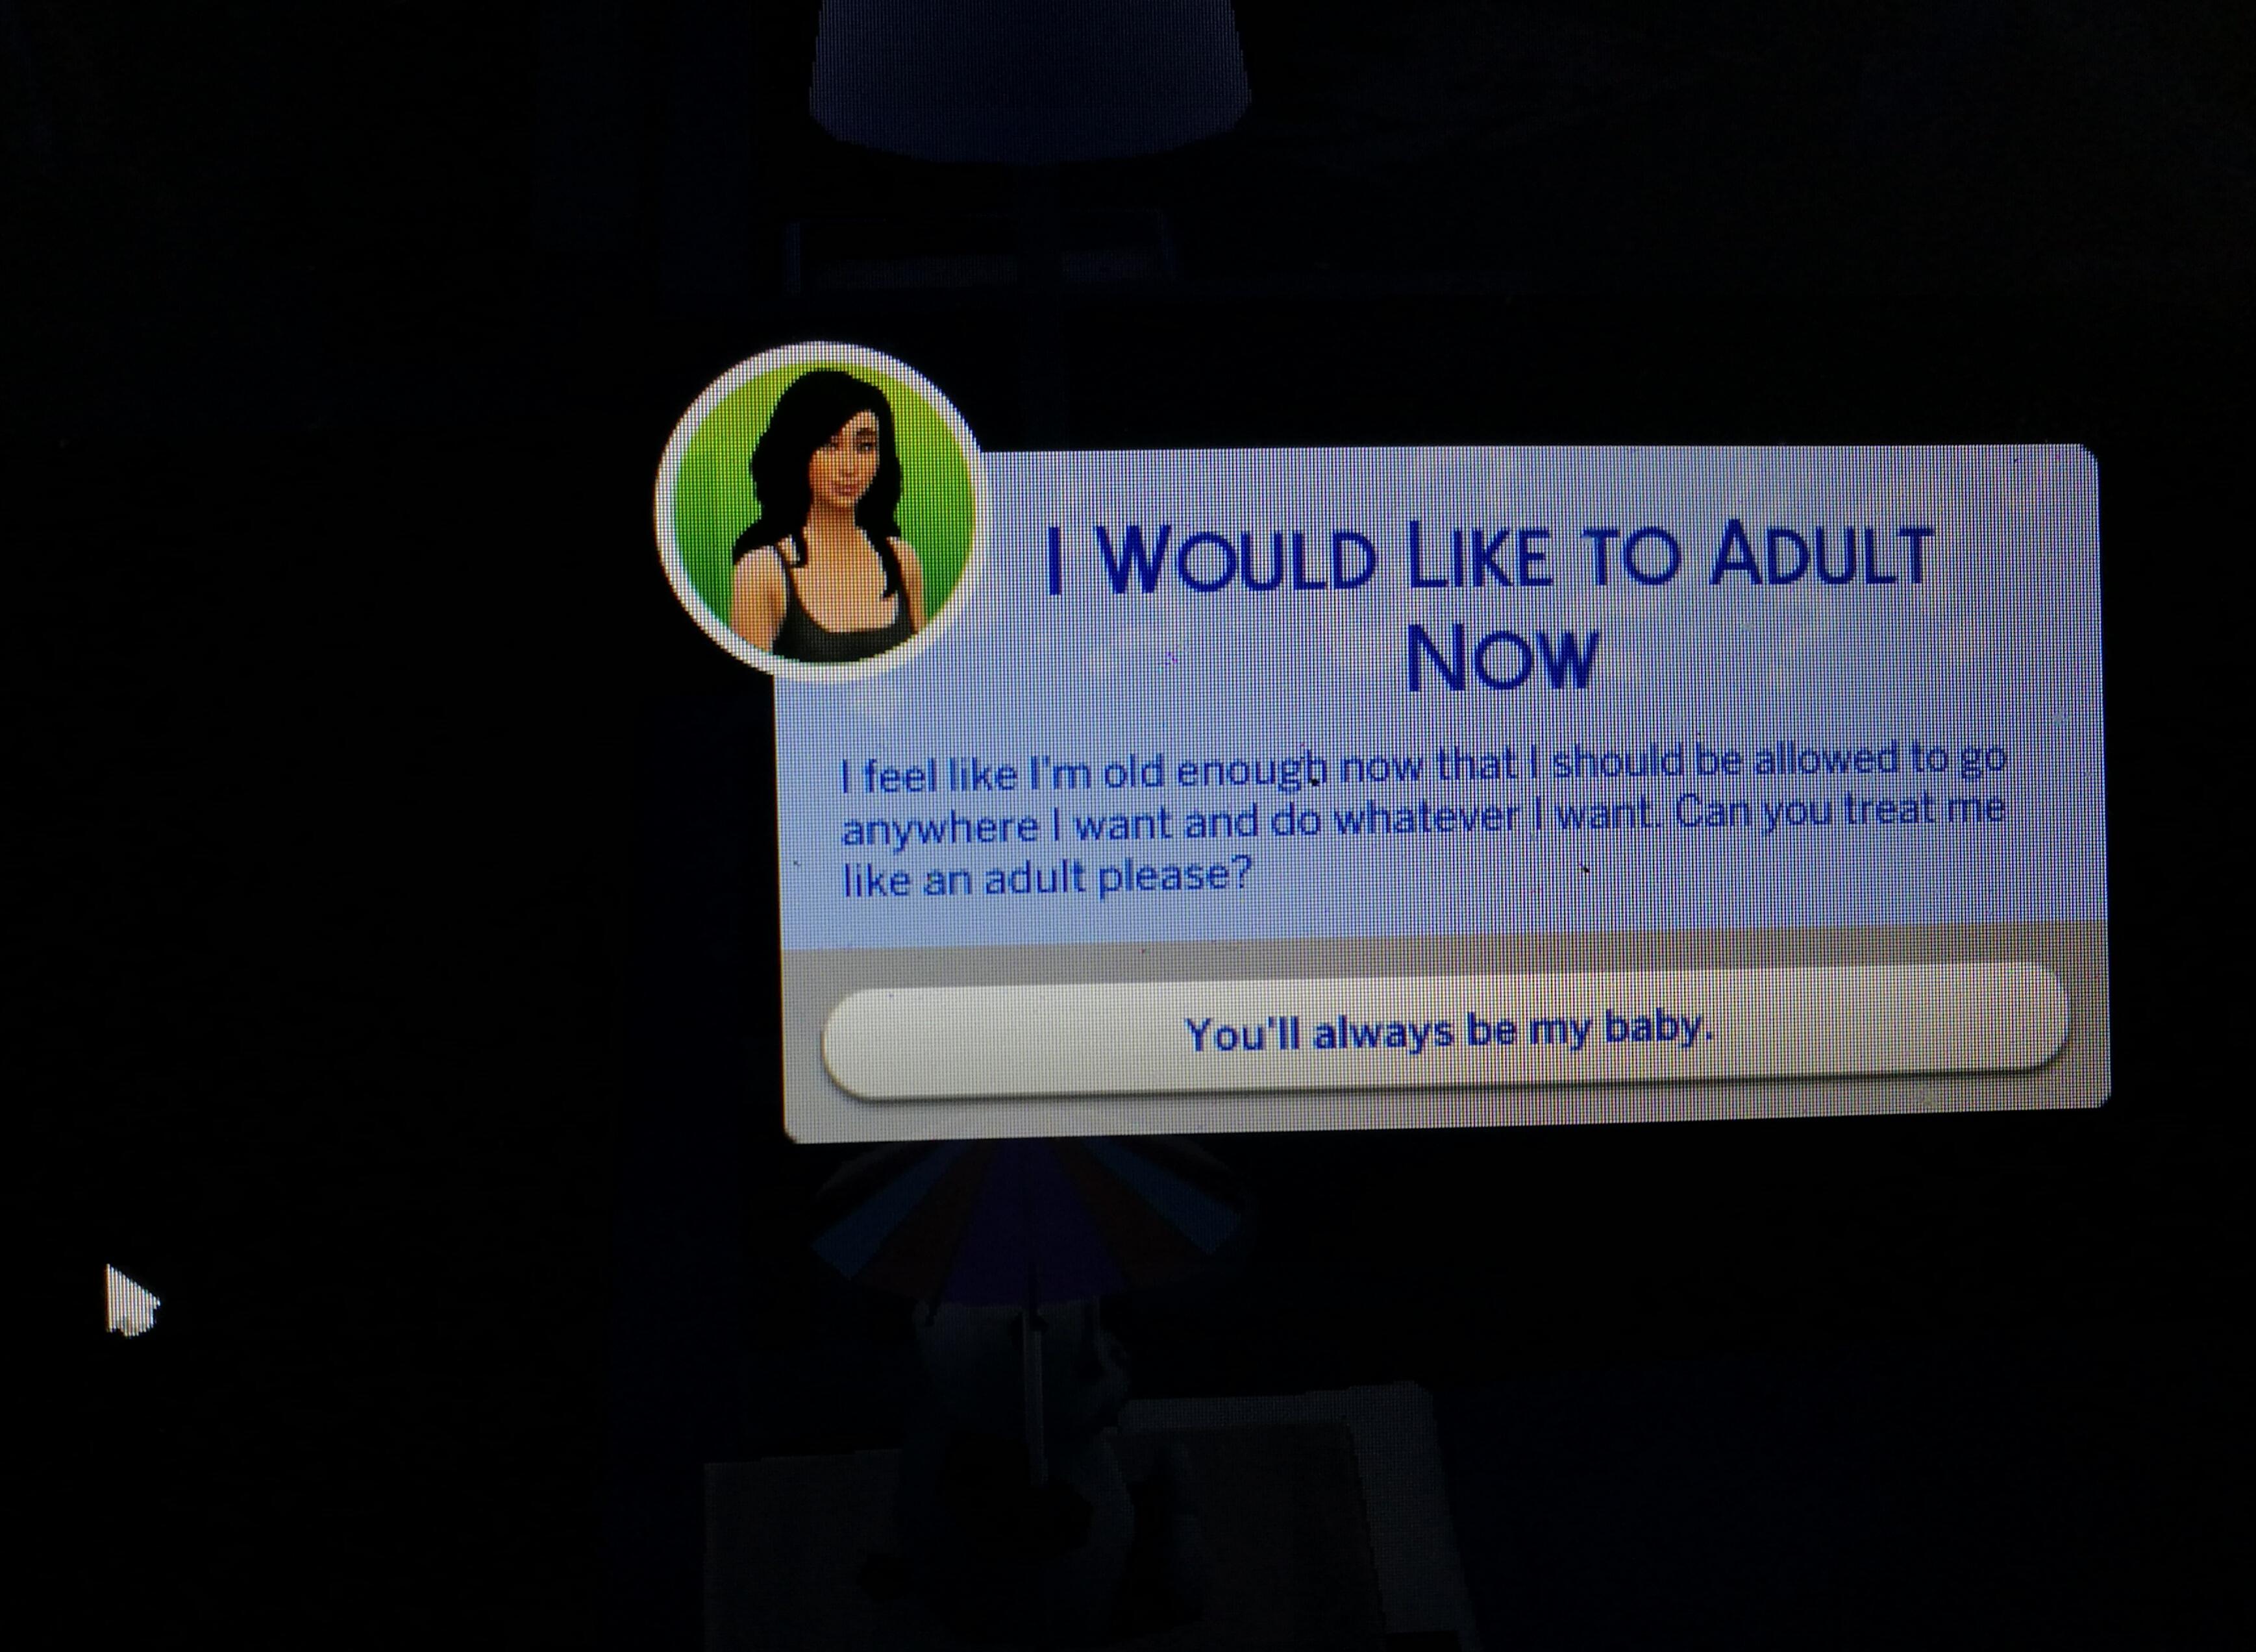 Sims 4 adult mods 2019